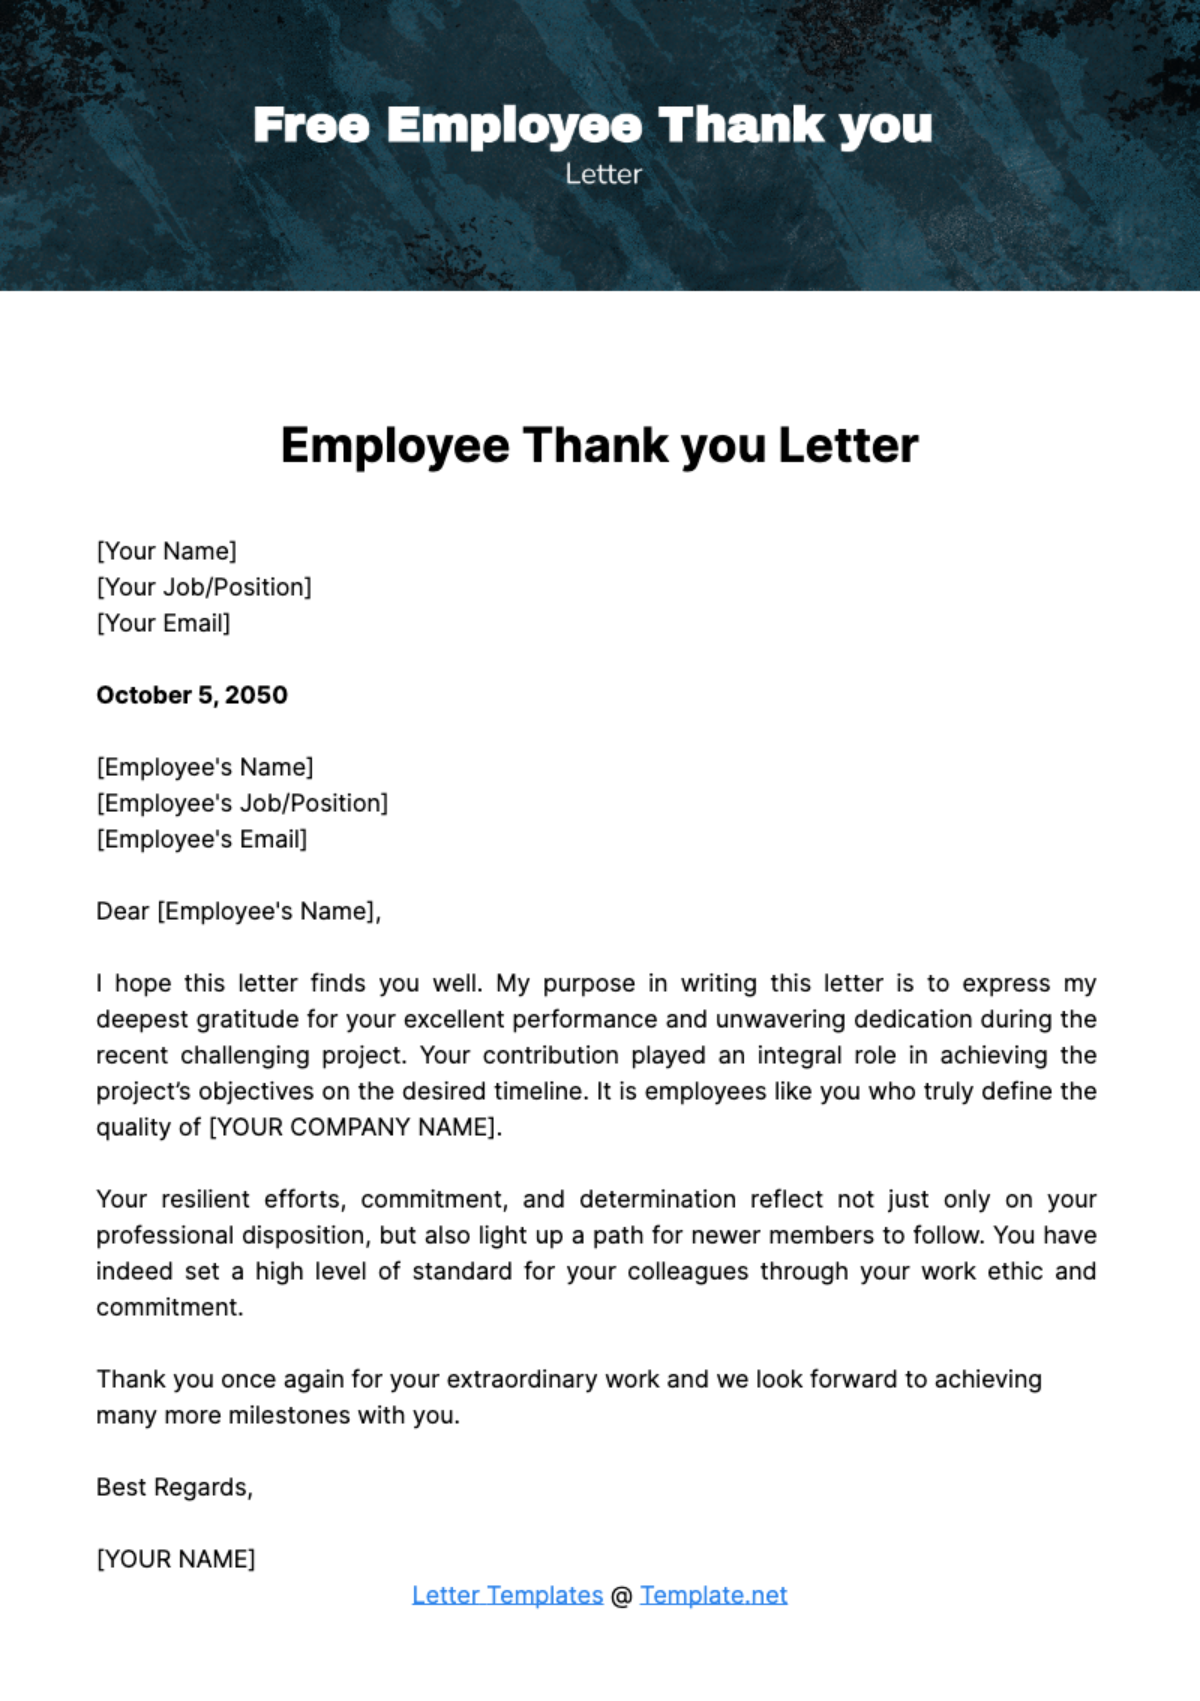 Free Employee Thank you Letter Template